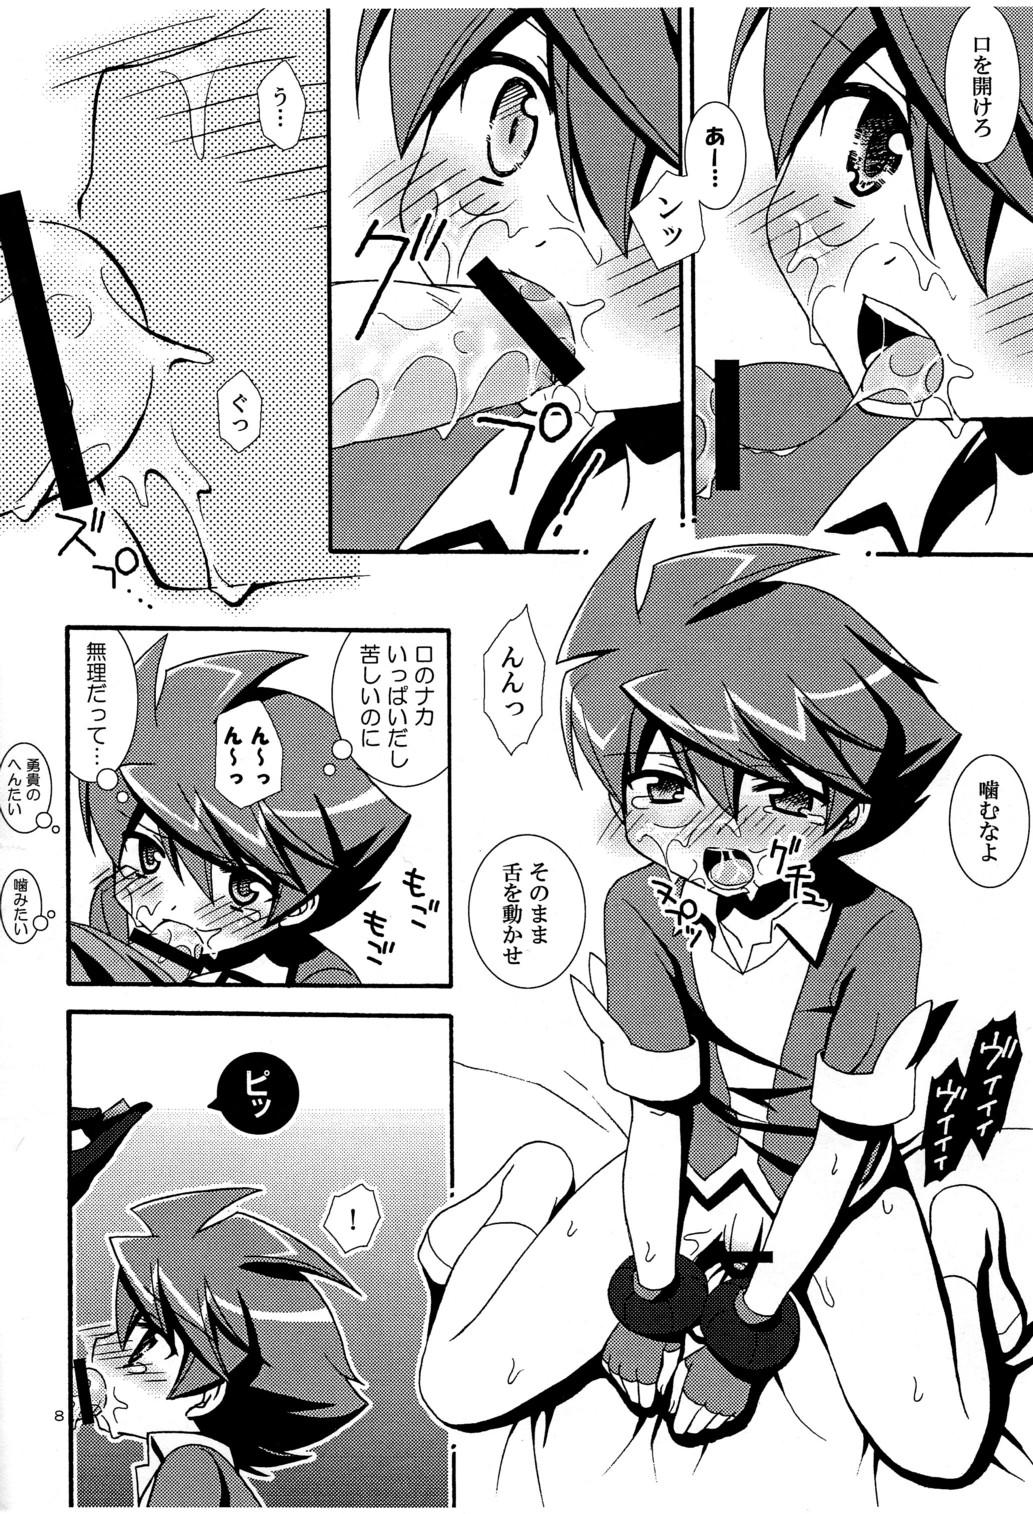 Exposed Ore no Shimobe - Battle spirits Lingerie - Page 8